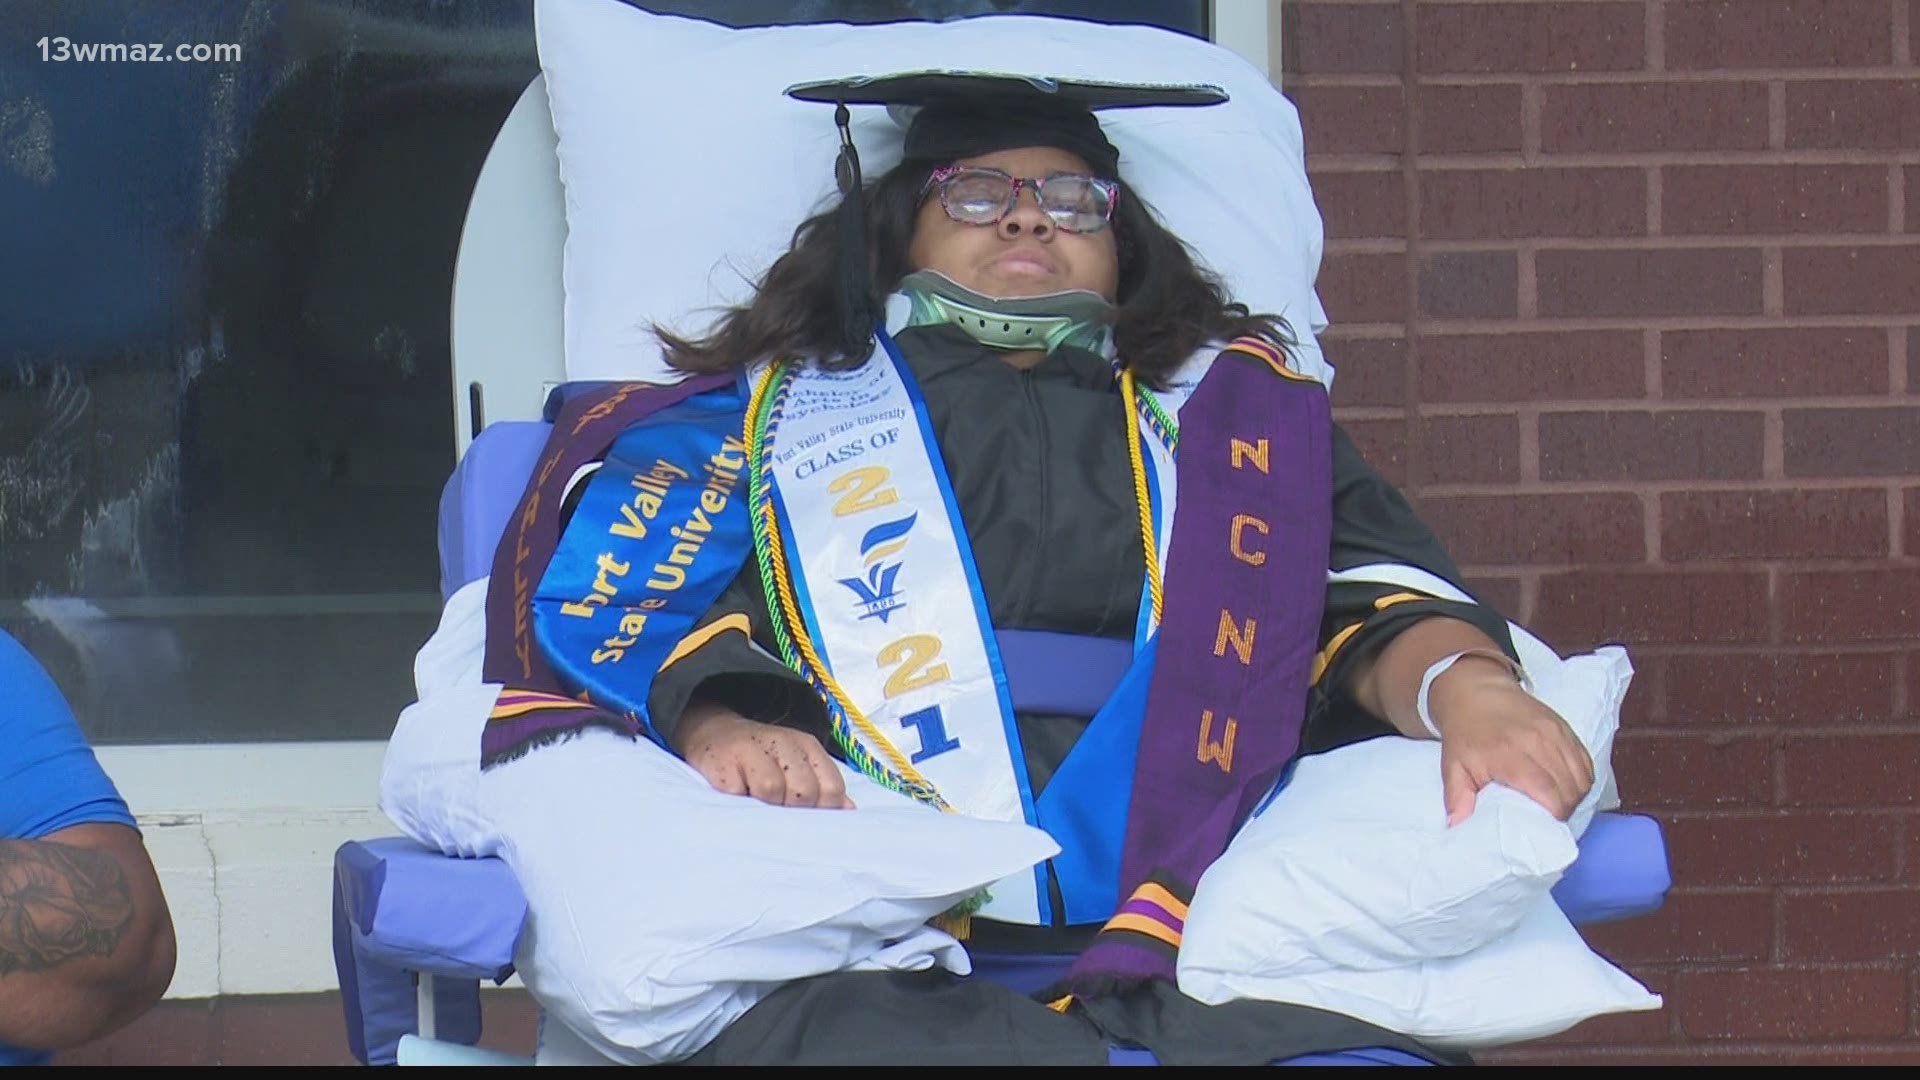 Asia Whitmore was hospitalized because of a car accident, but Wednesday, she was able to receive her diploma in an outdoor ceremony at Atrium Health Navicent